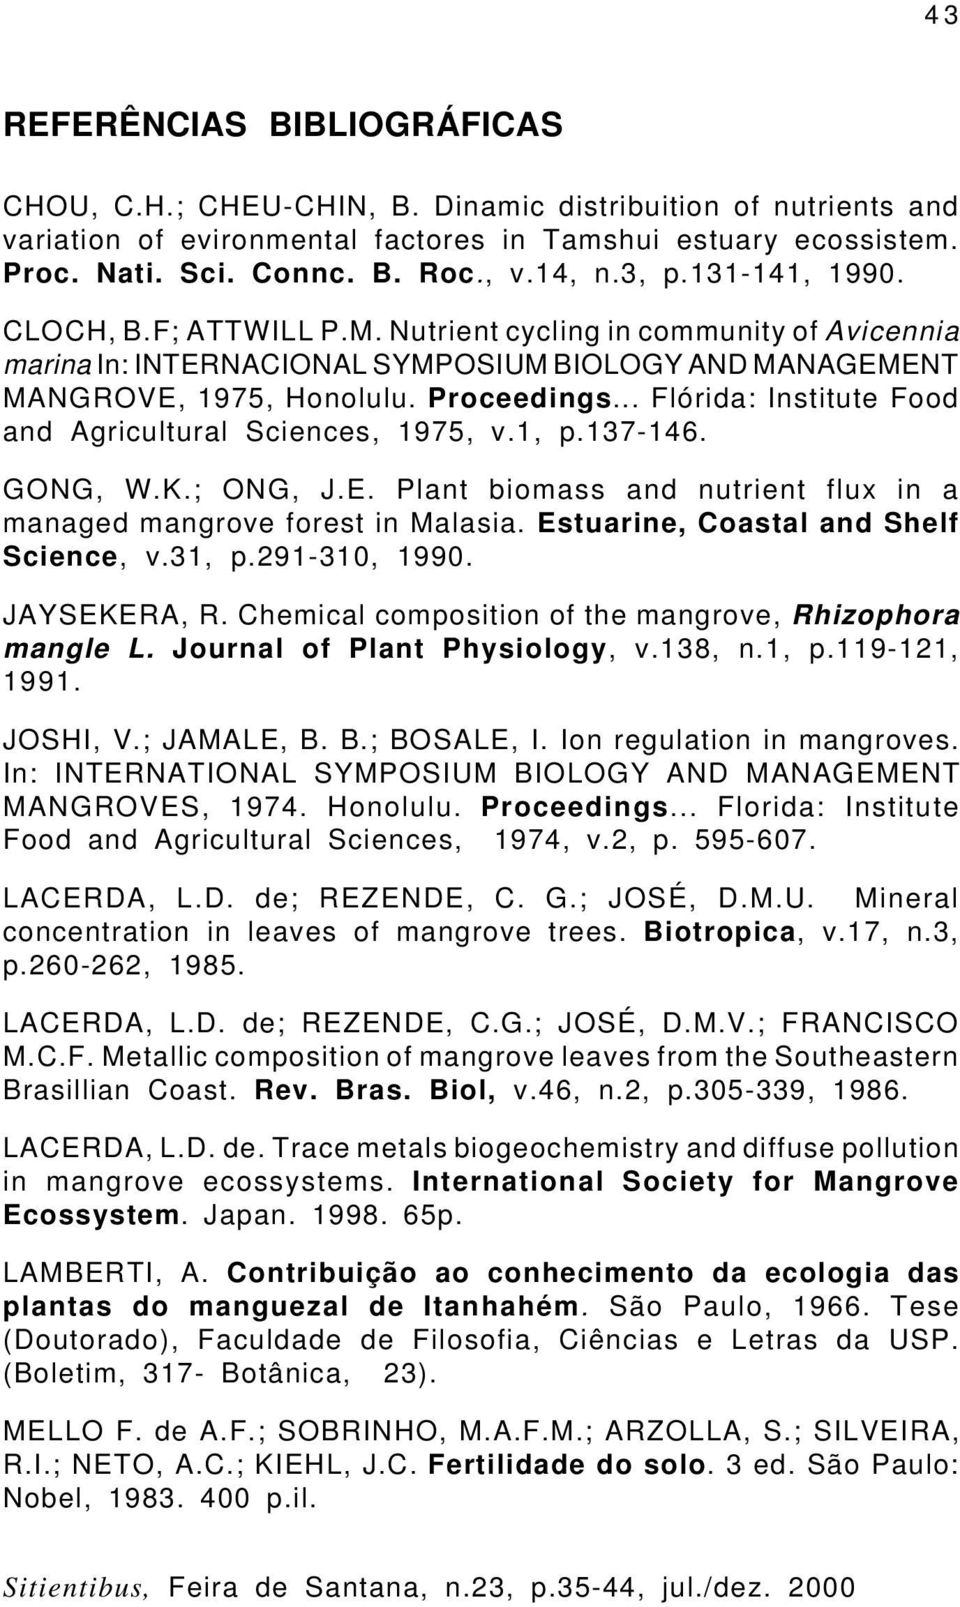 .. Flórida: Institute Food and Agricultural Sciences, 1975, v.1, p.137-146. GONG, W.K.; ONG, J.E. Plant biomass and nutrient flux in a managed mangrove forest in Malasia.